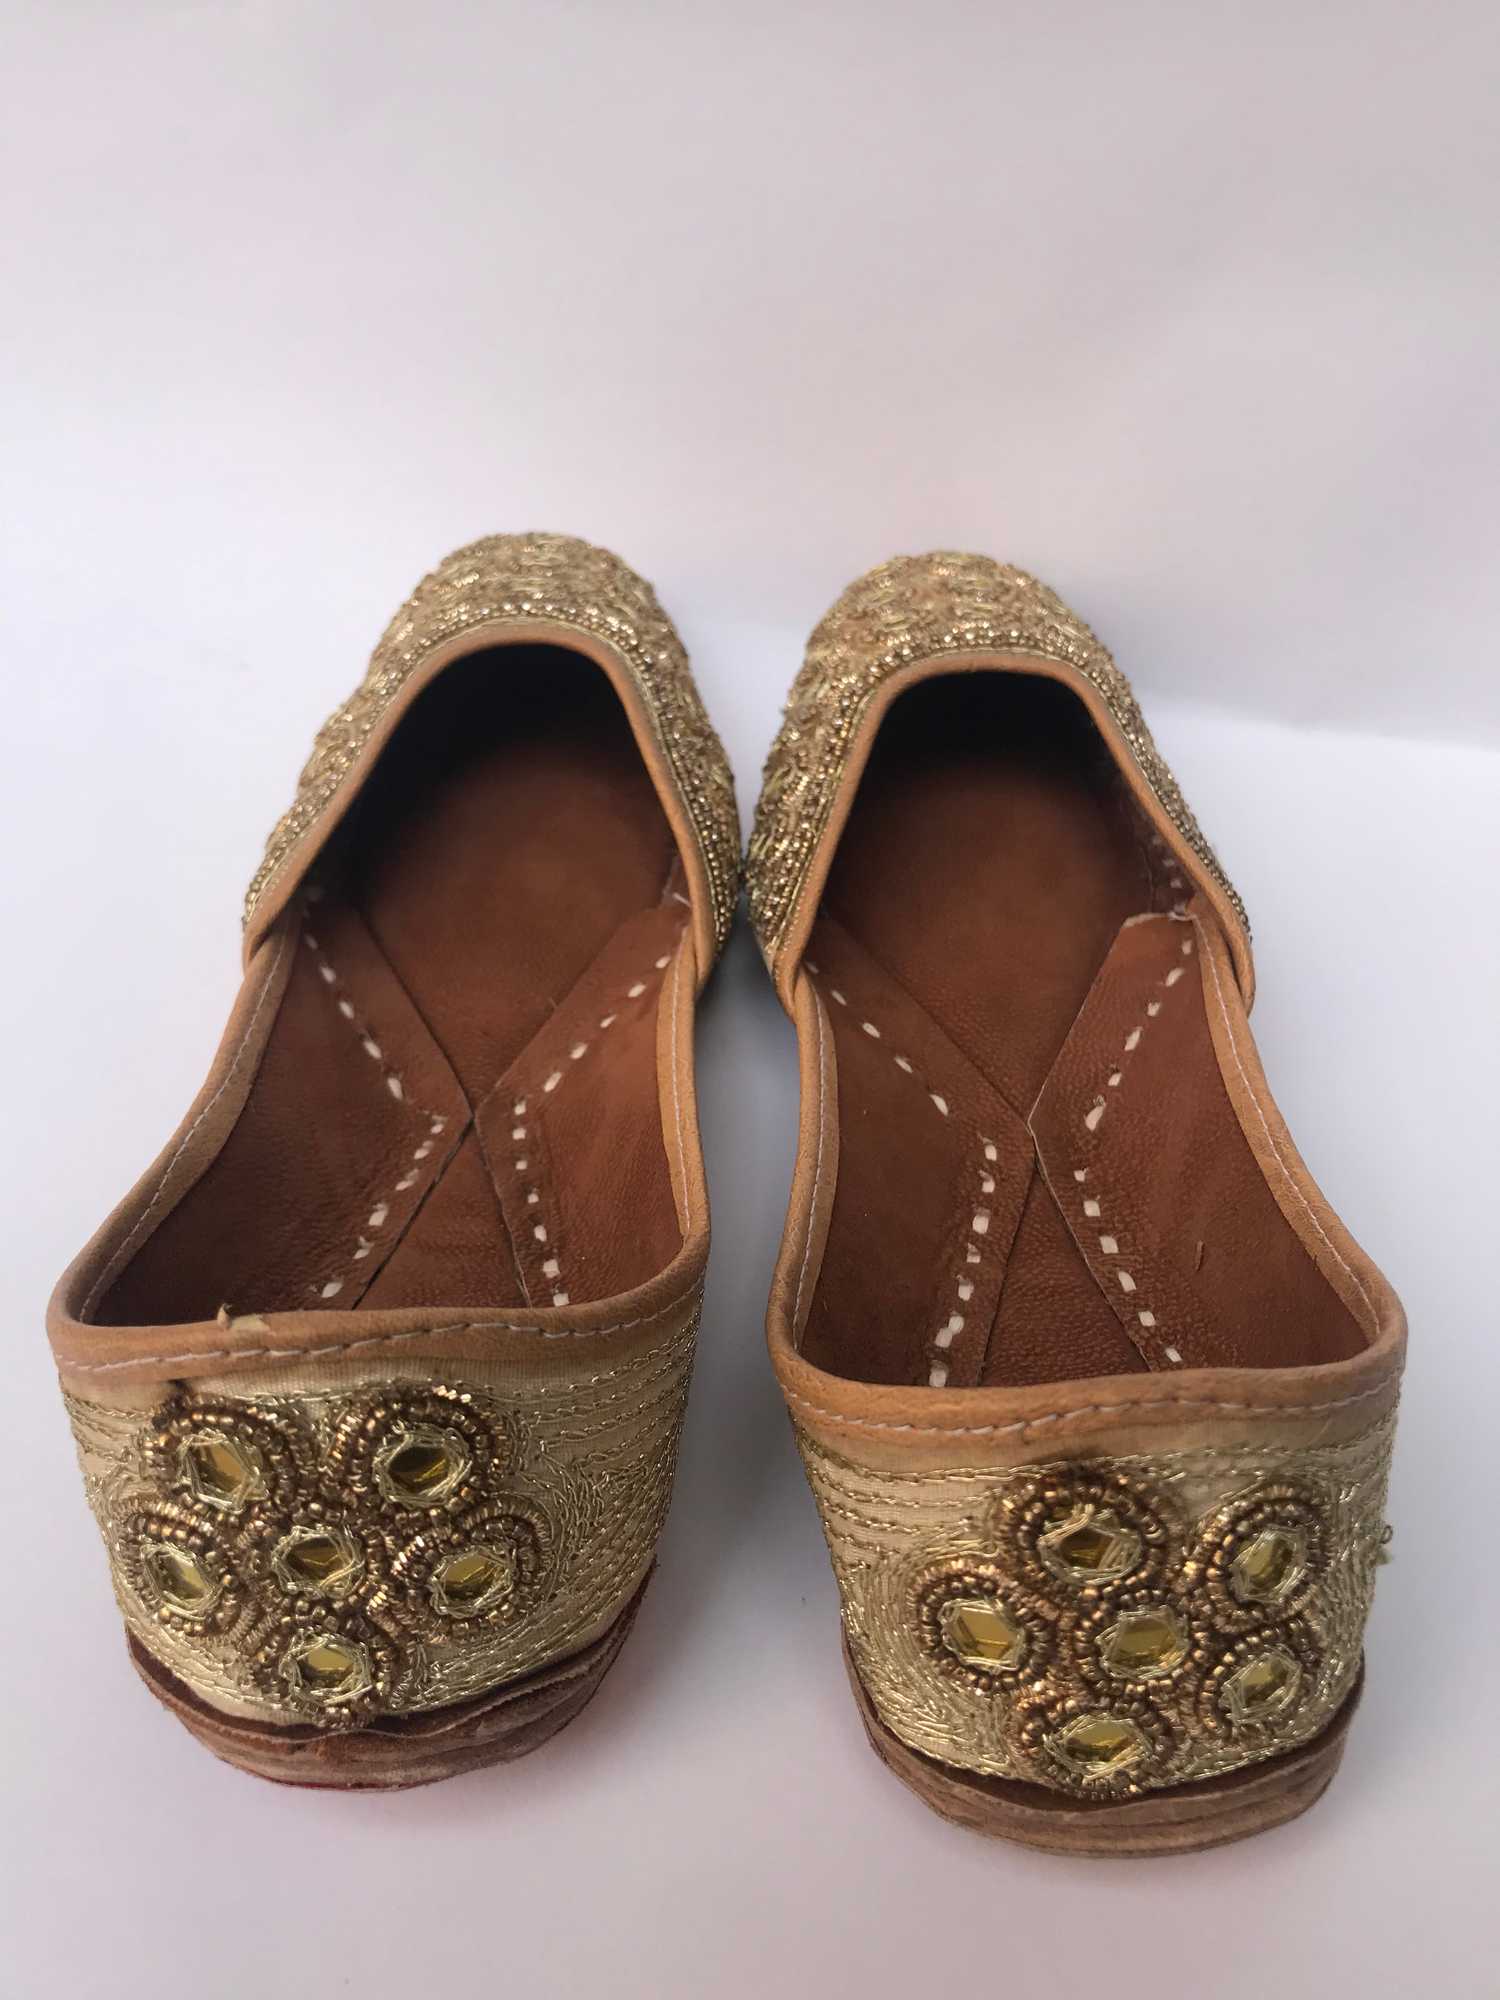 Nepali Handmade Curse Shoes, With Leather And Bead Design